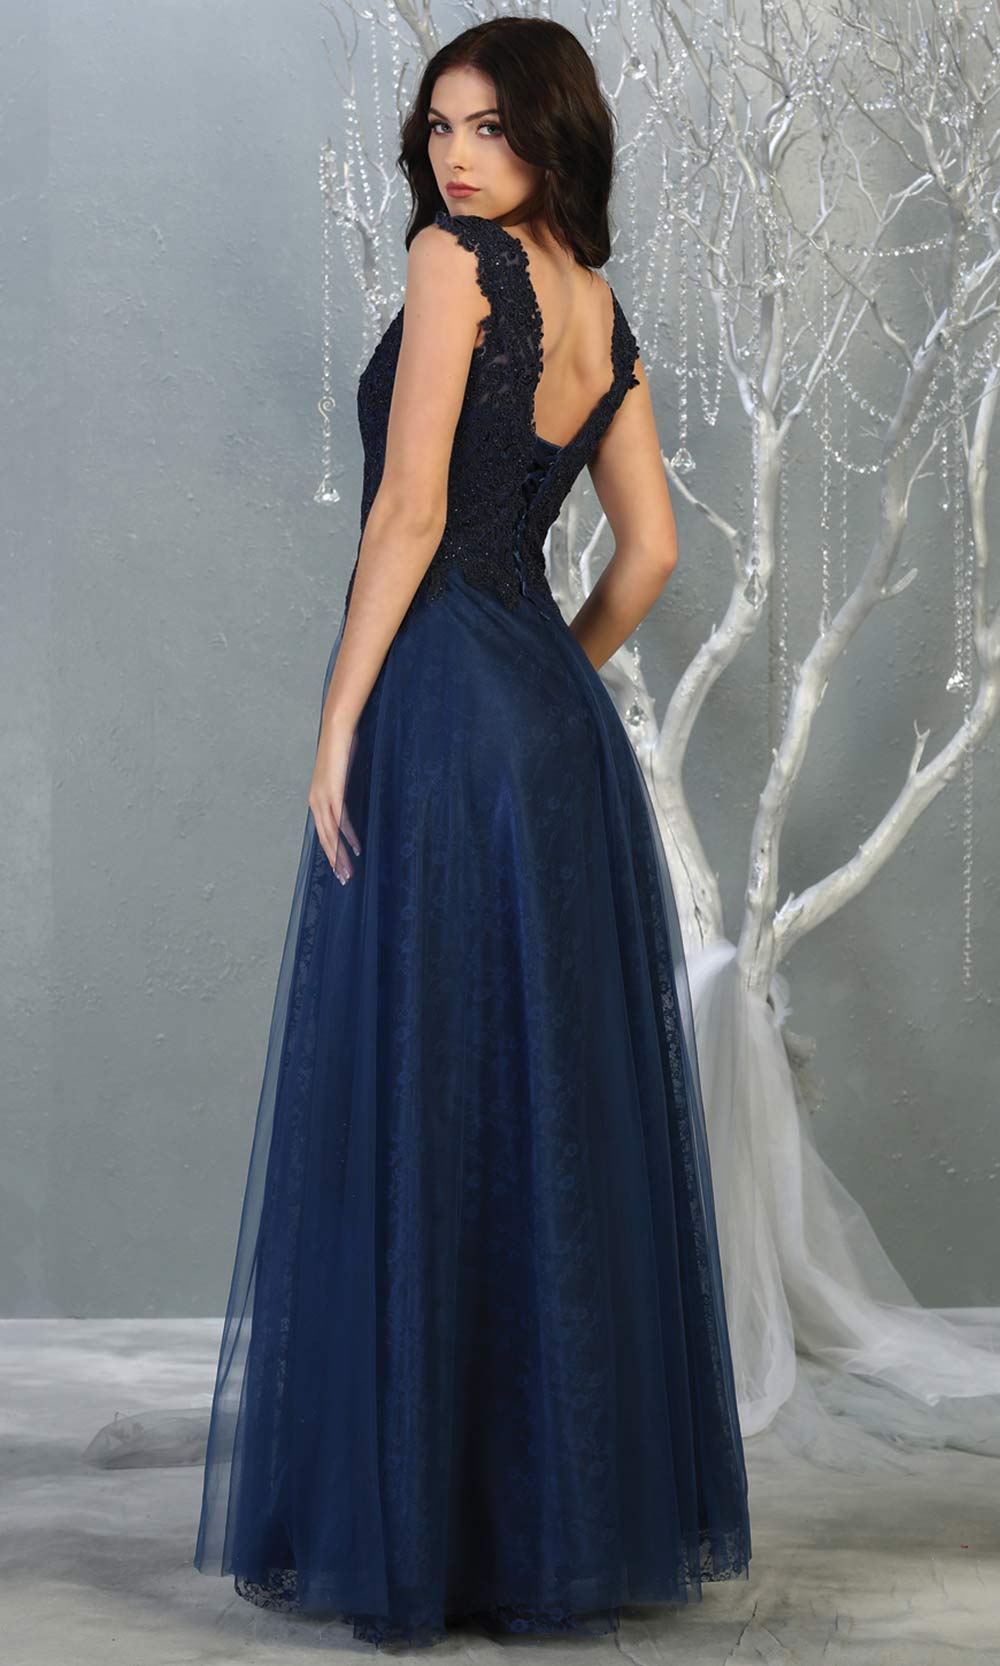 Mayqueen MQ1799 long navy blue v neck evening fitted dress. Full length dark blue lace gown w/skirt overlay is perfect for  enagagement/e-shoot dress, formal wedding guest, indowestern gown, evening party dress, prom, bridesmaid. Plus sizes avail-b.jpg